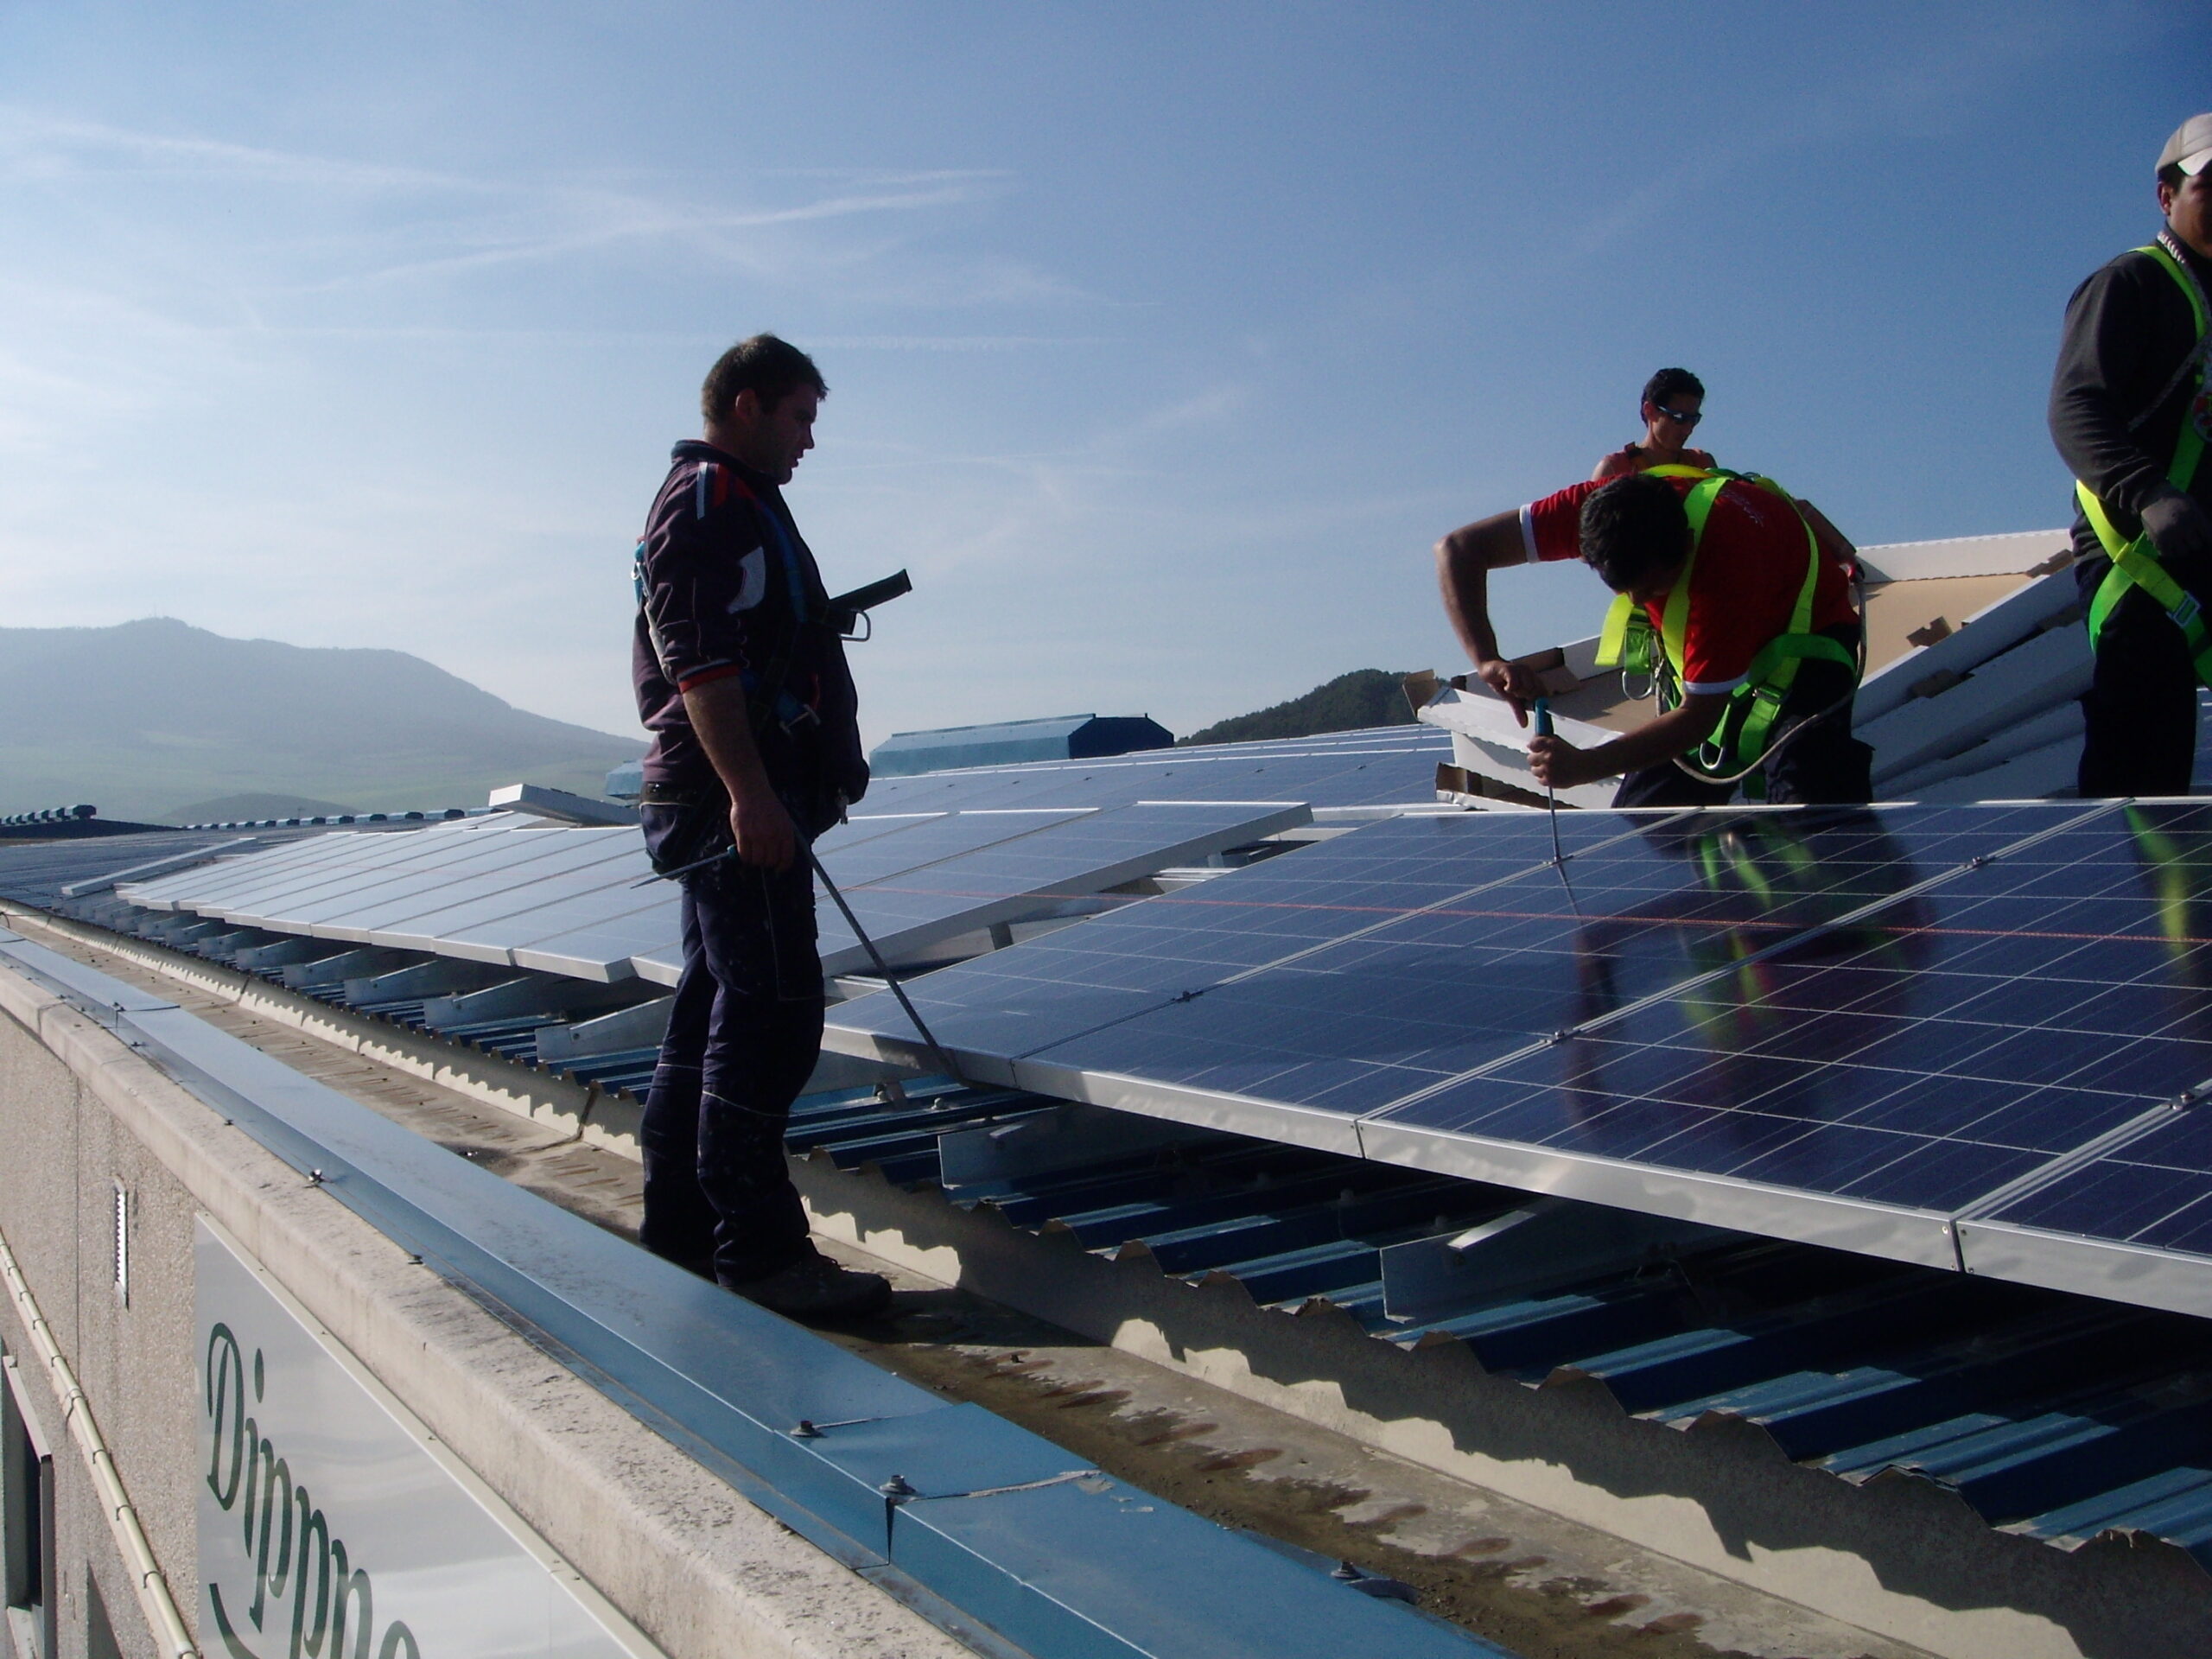 Workers installing solar panels on a rooftop with mountains in the background.
